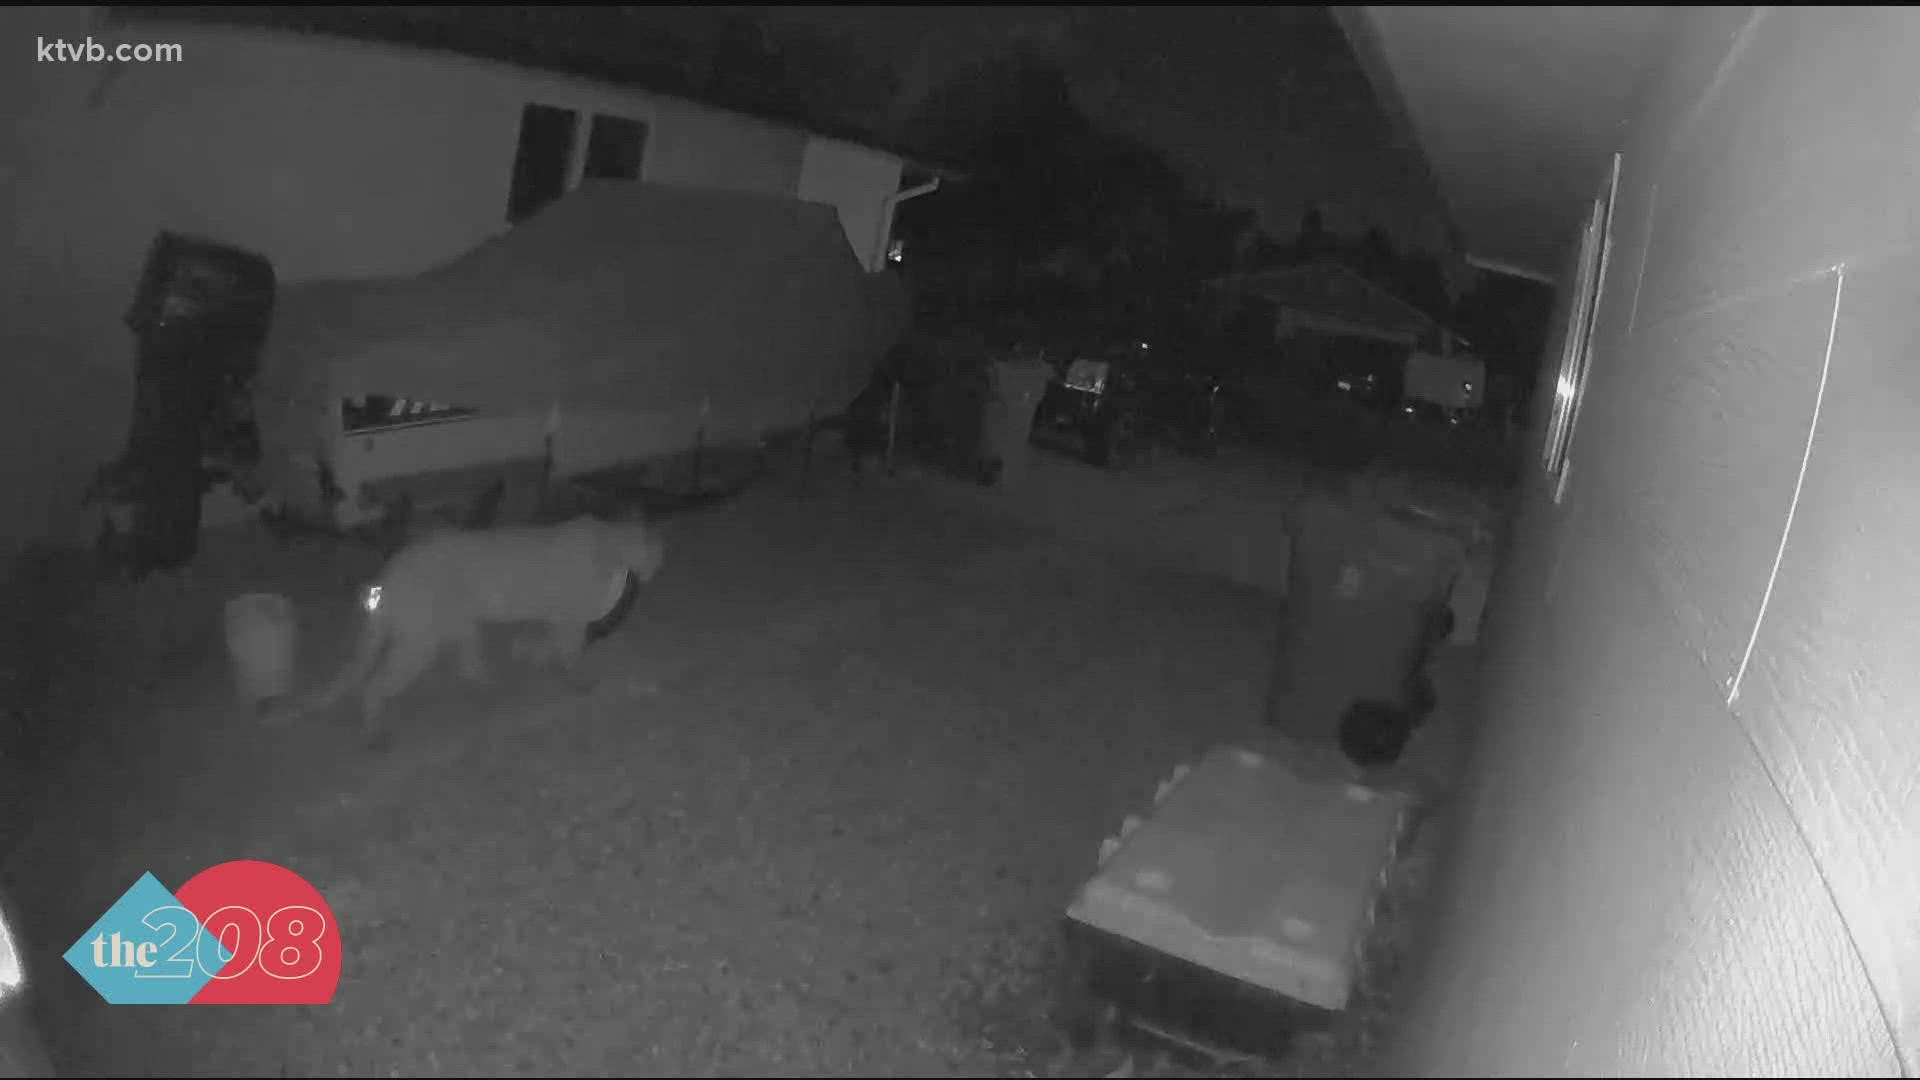 It's not normal to see a mountain lion in a suburban neighborhood, but what could he have been doing?